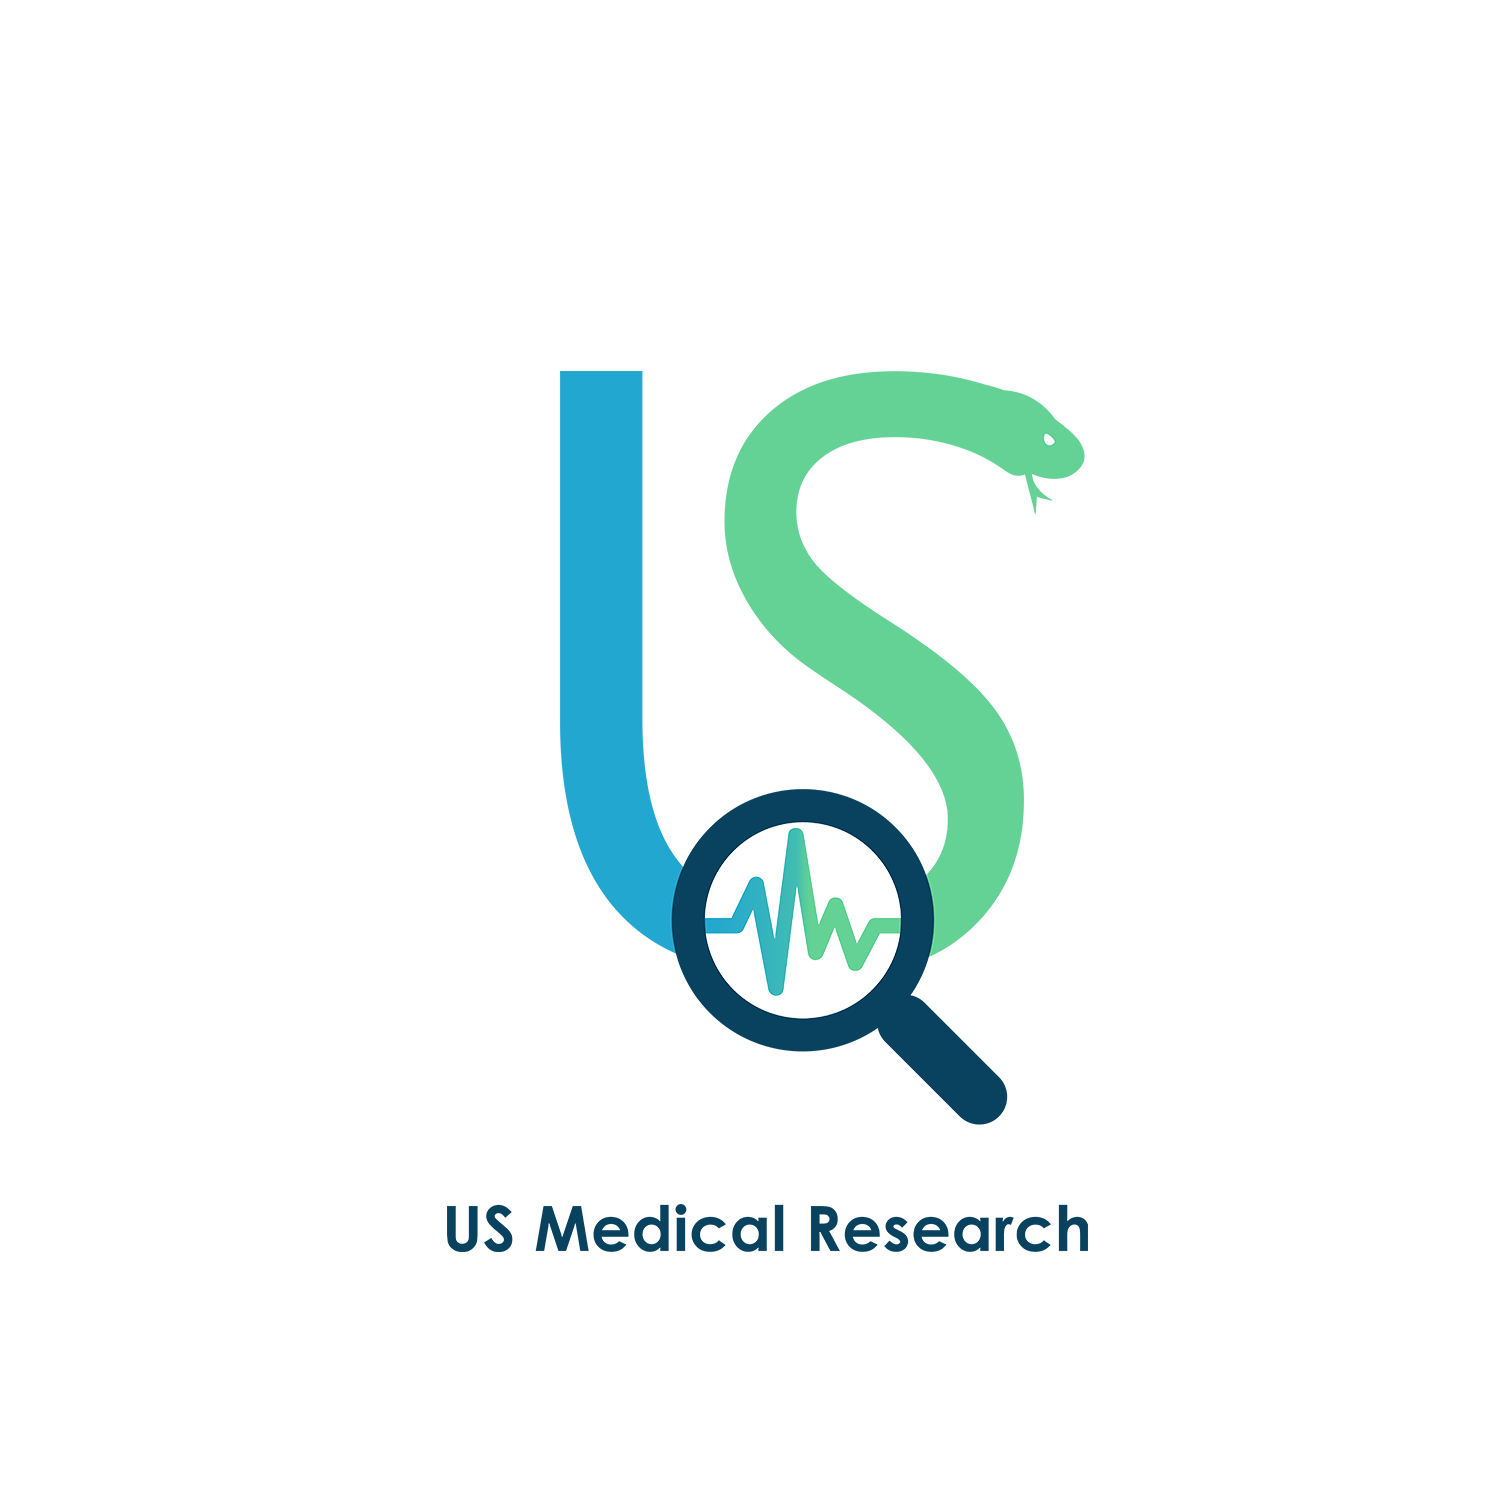 US-MEDICAL-RESEARCH